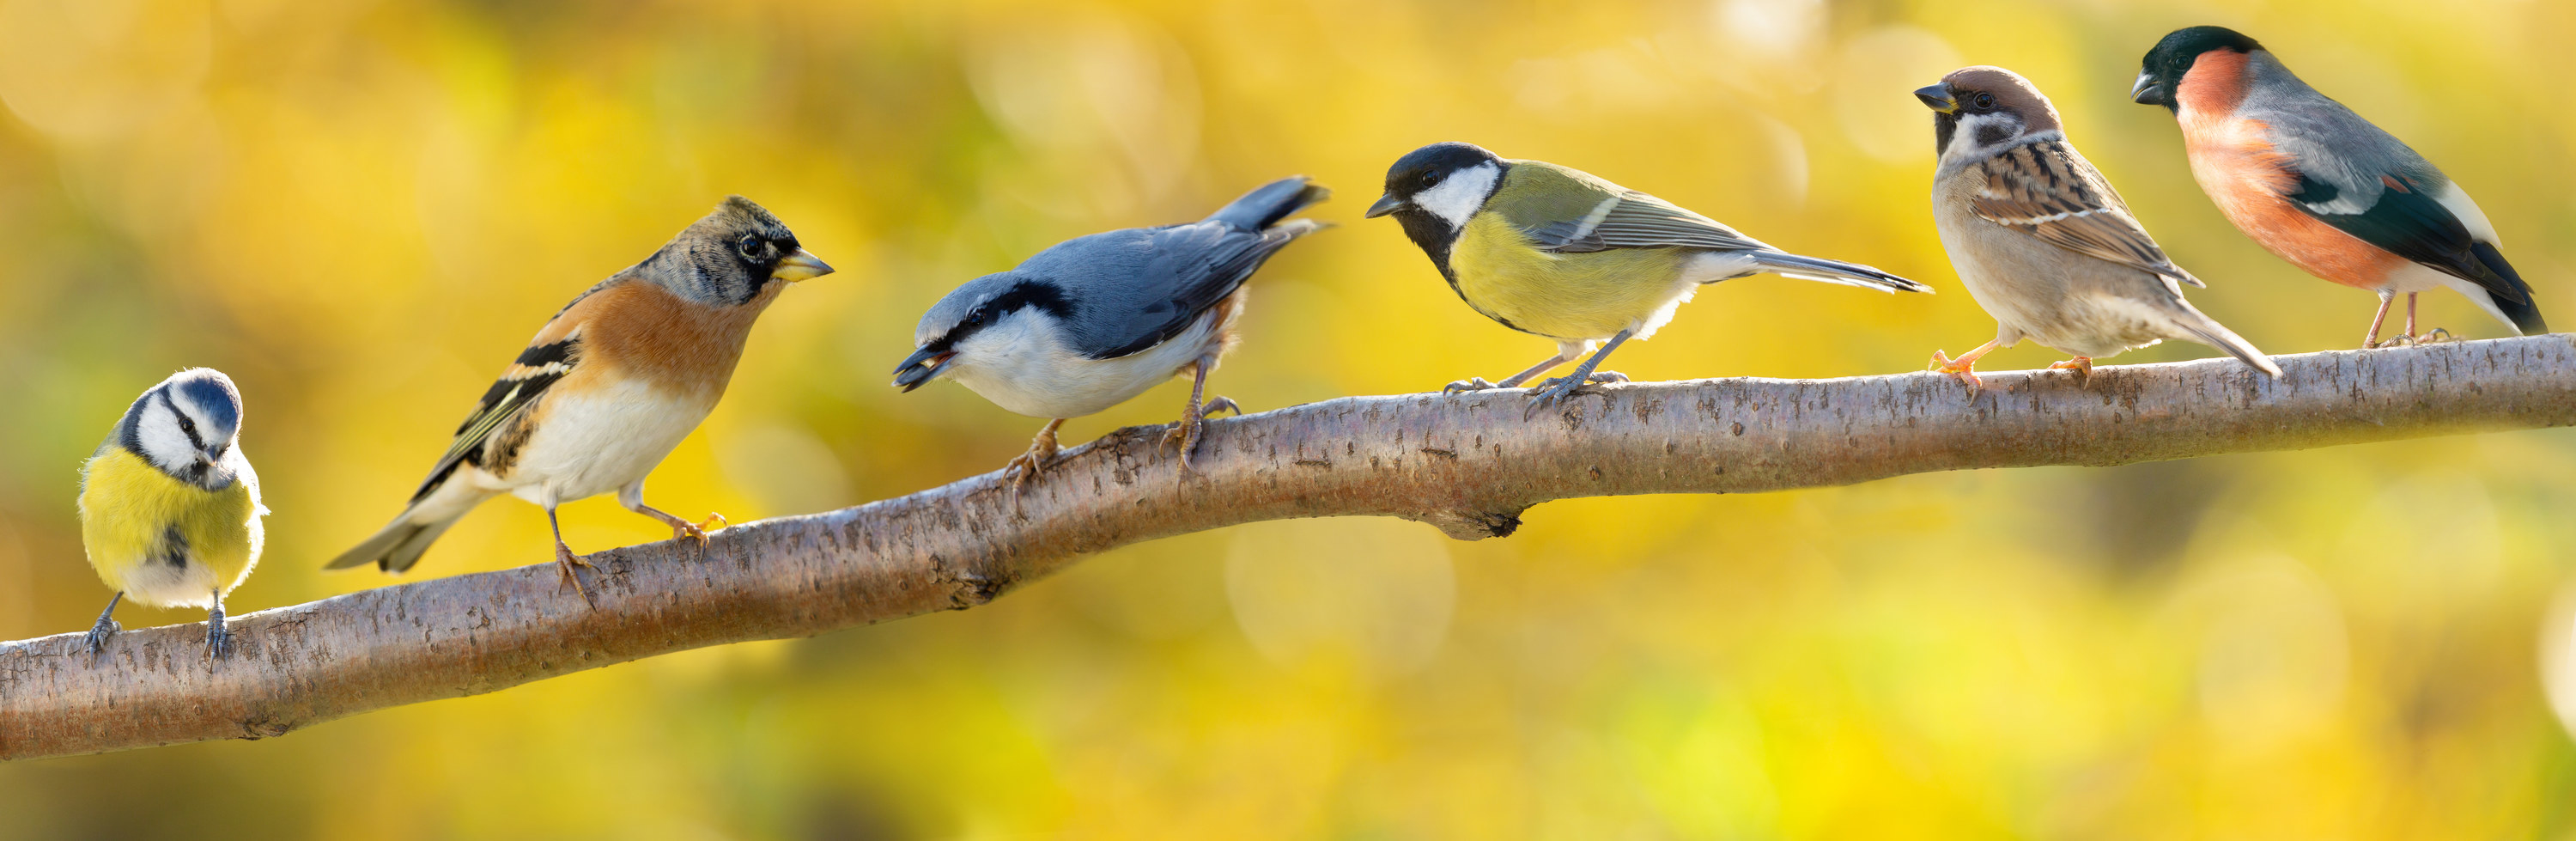 Small, colorful birds on a branch